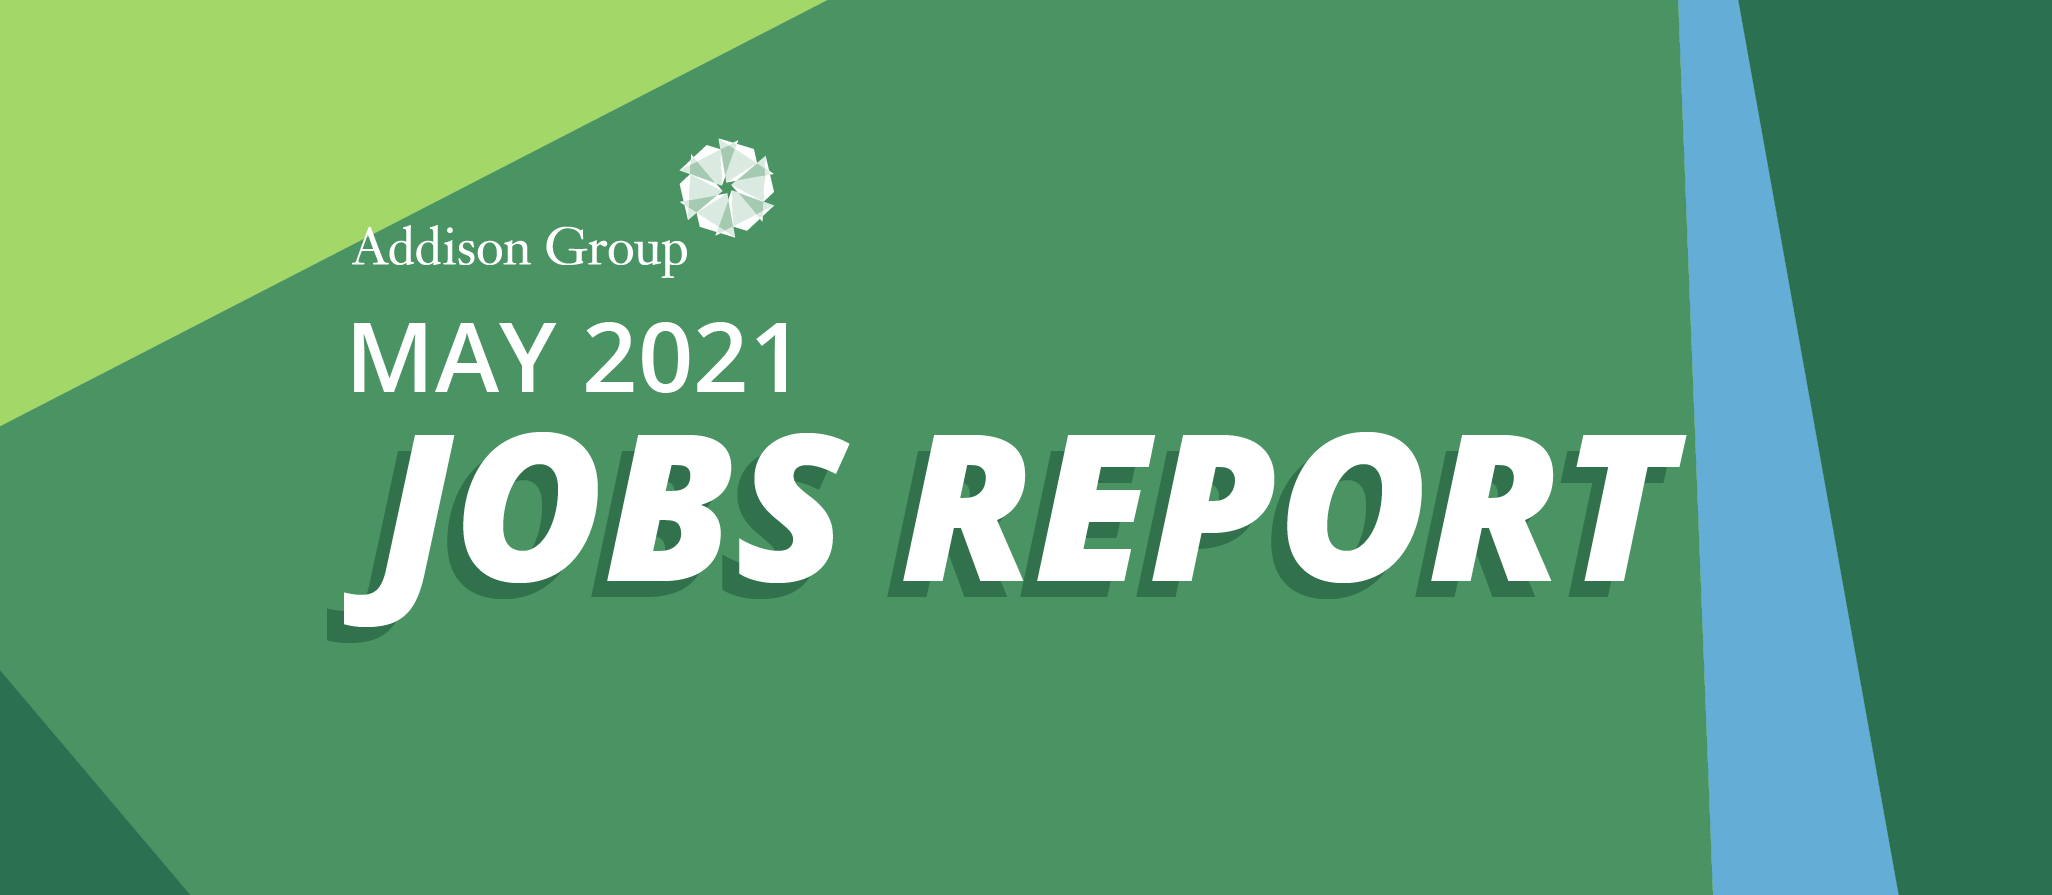 Addison jobs report may 2021